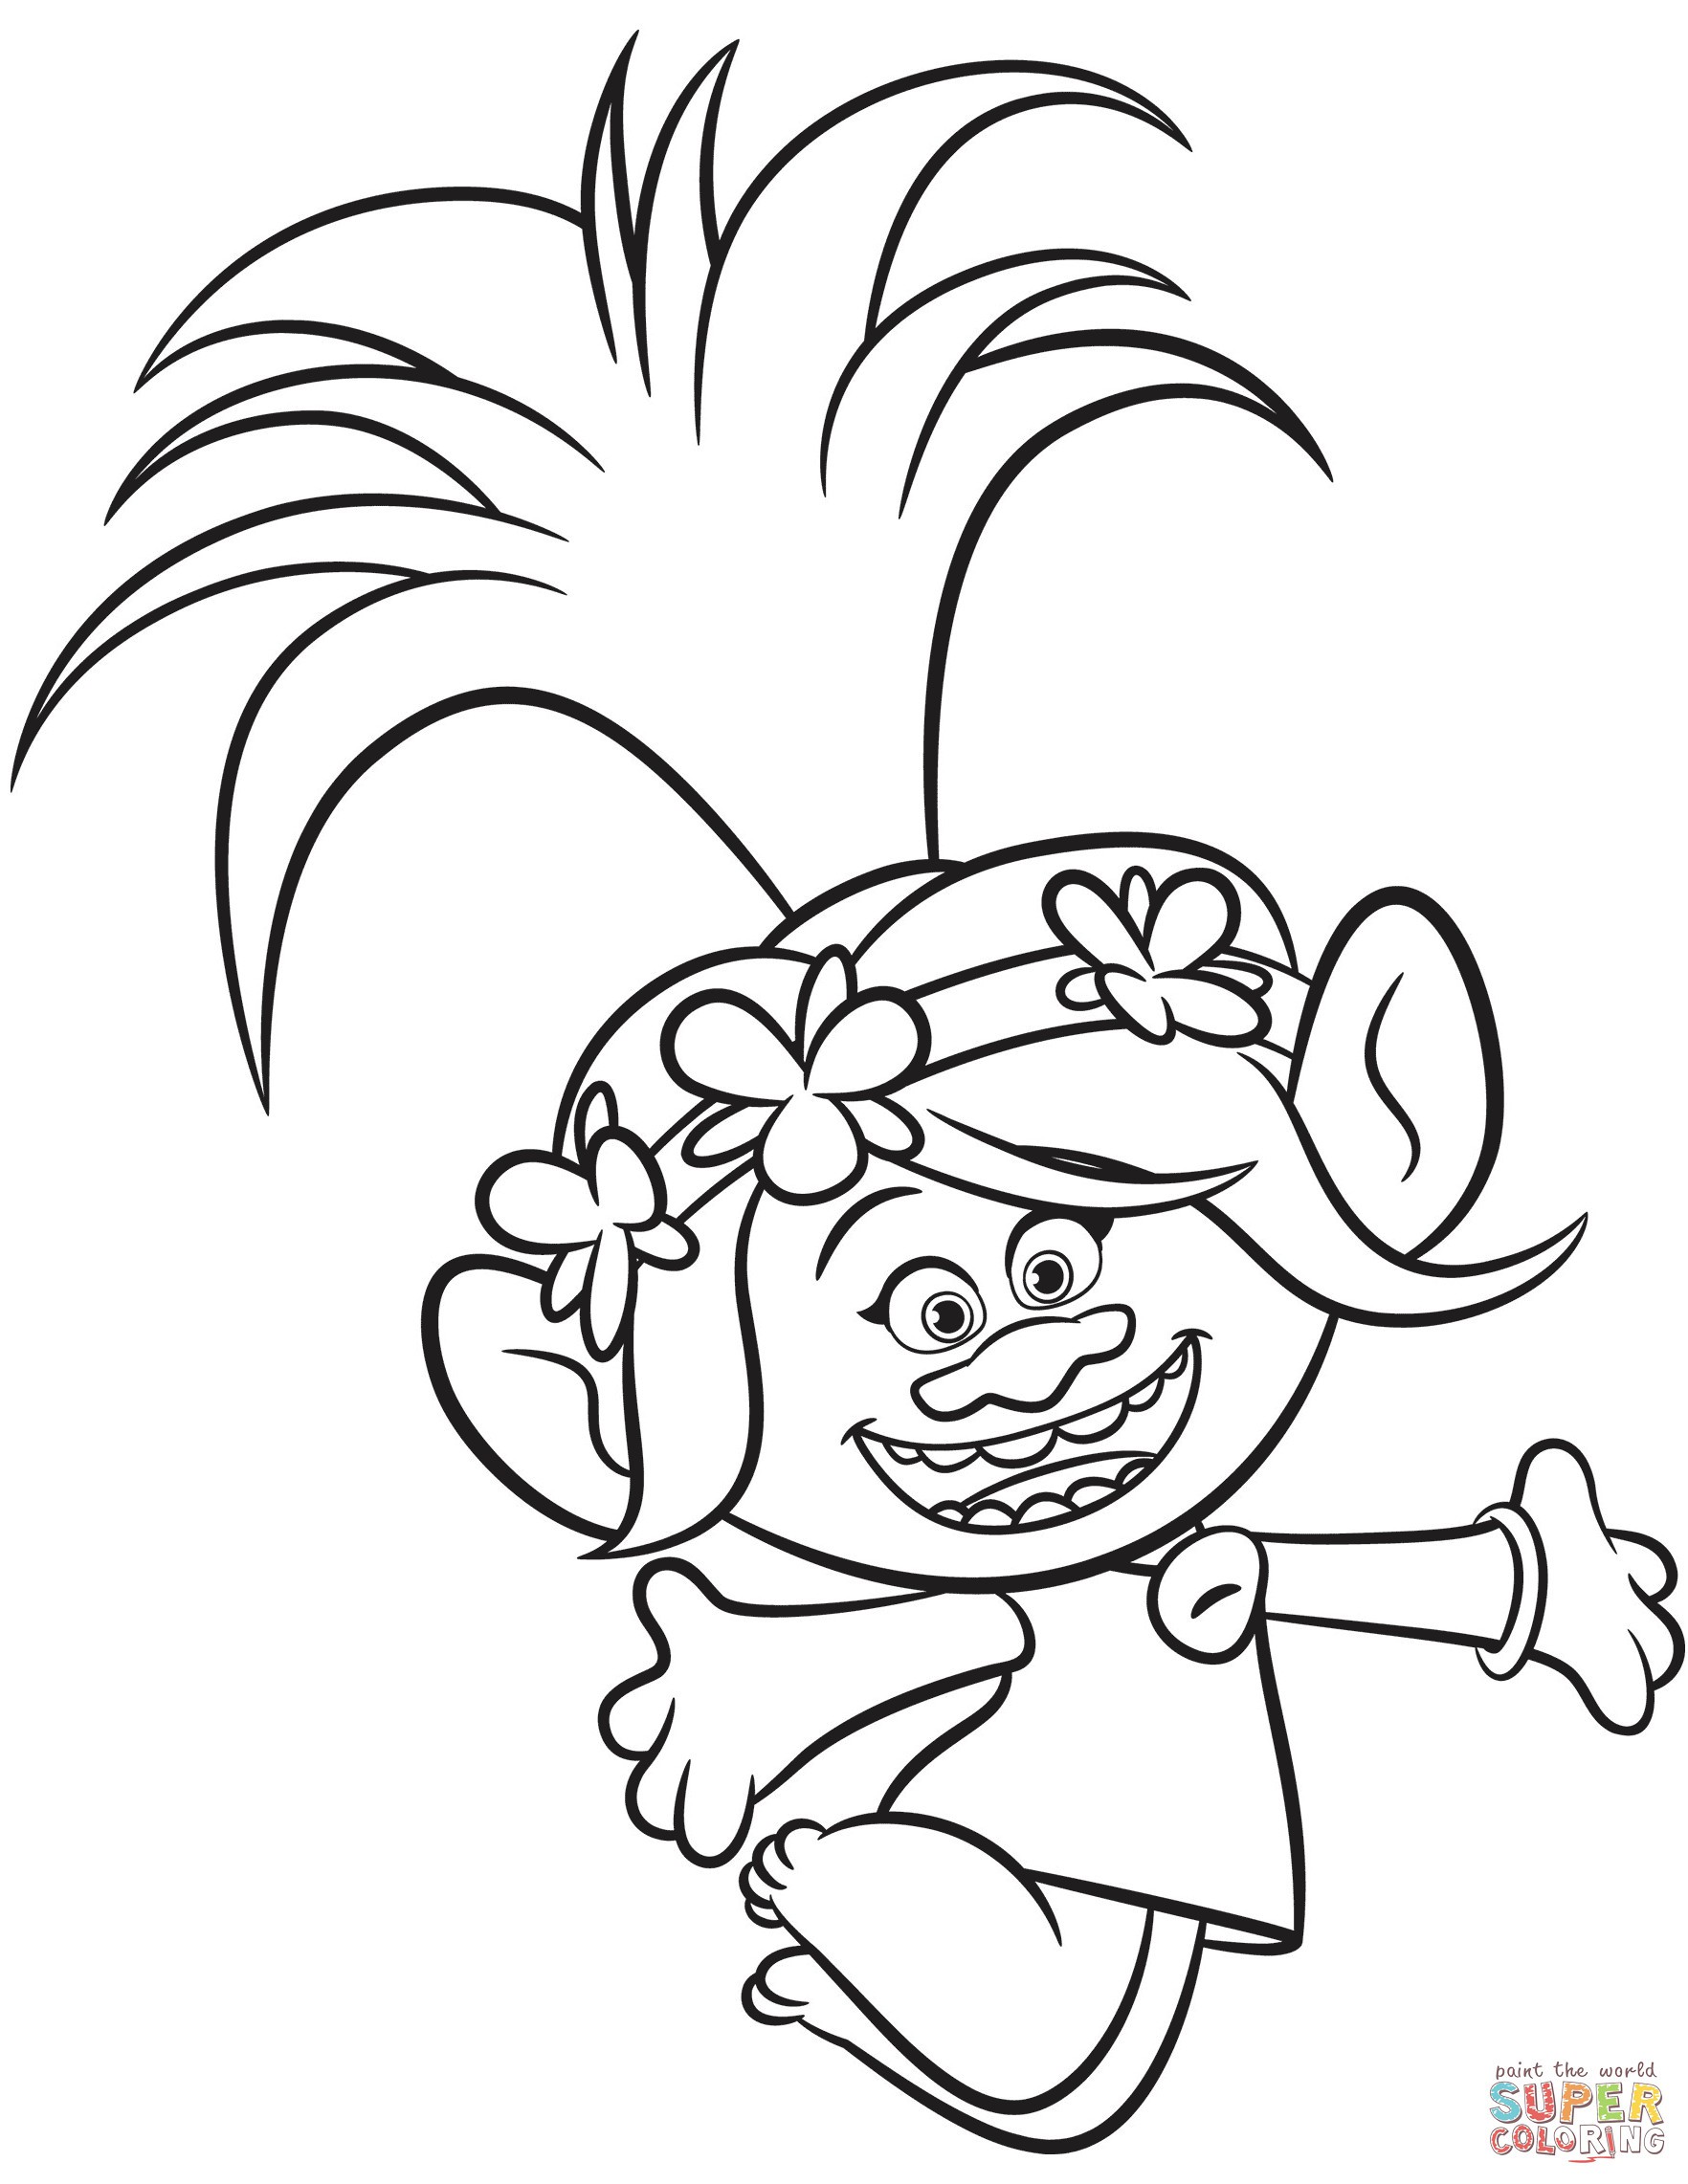 Poppy From Trolls 2 Coloring Page 11 Pages To